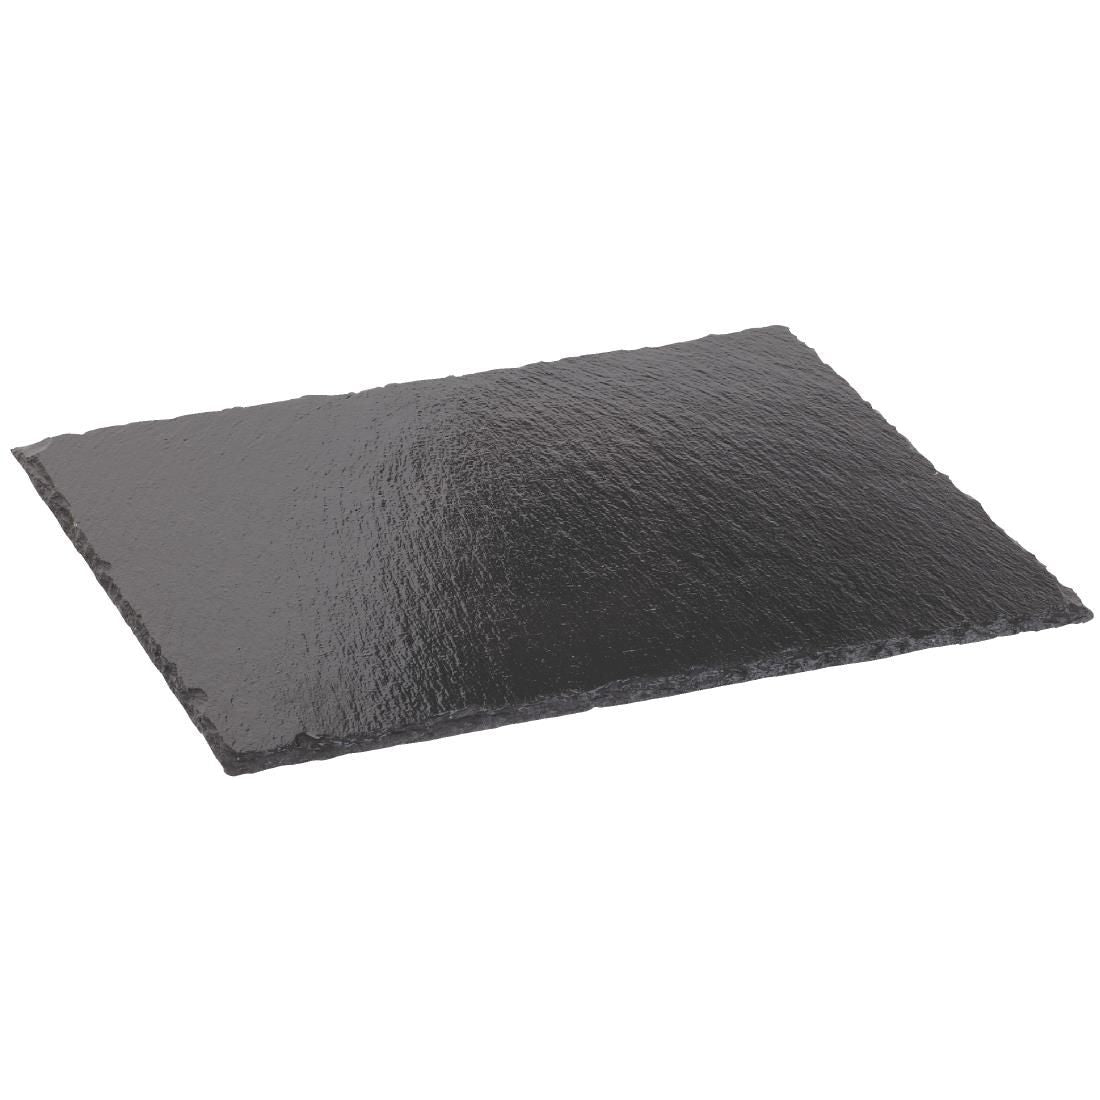 Olympia Natural Slate Boards GN 1/3 (Pack of 2)